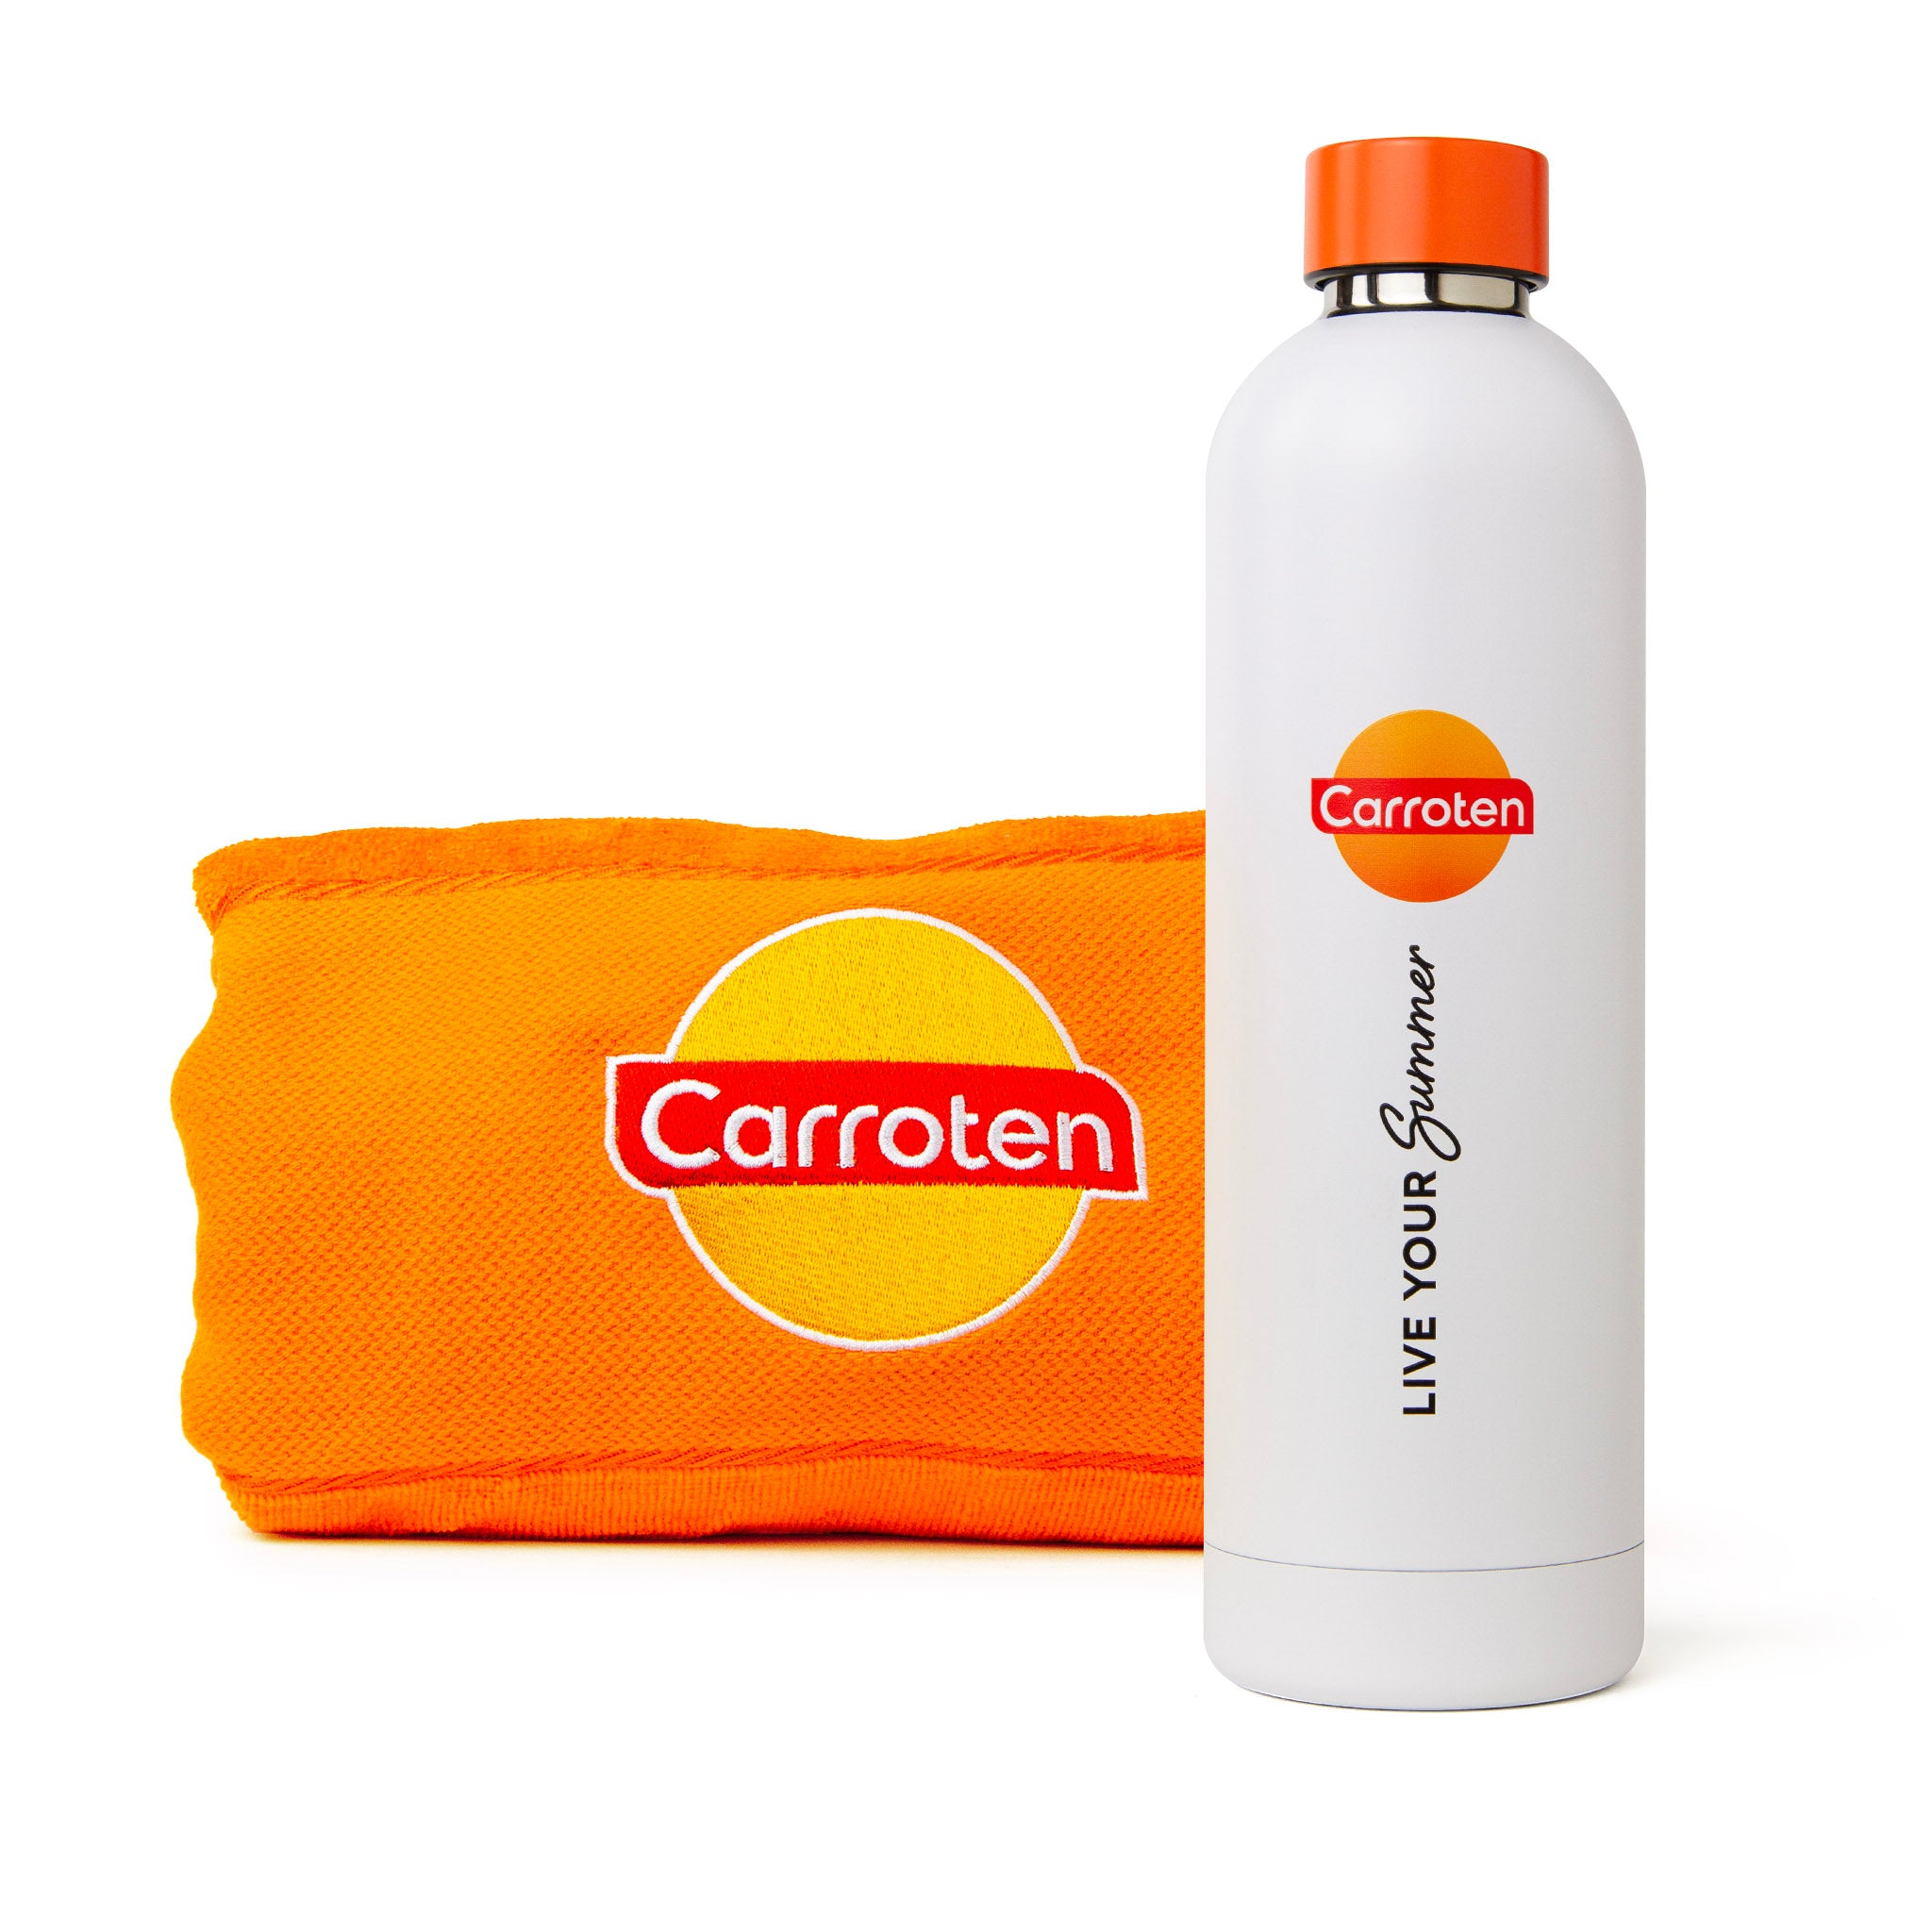 Carroten Terry Towel and LYS Drink Bottle